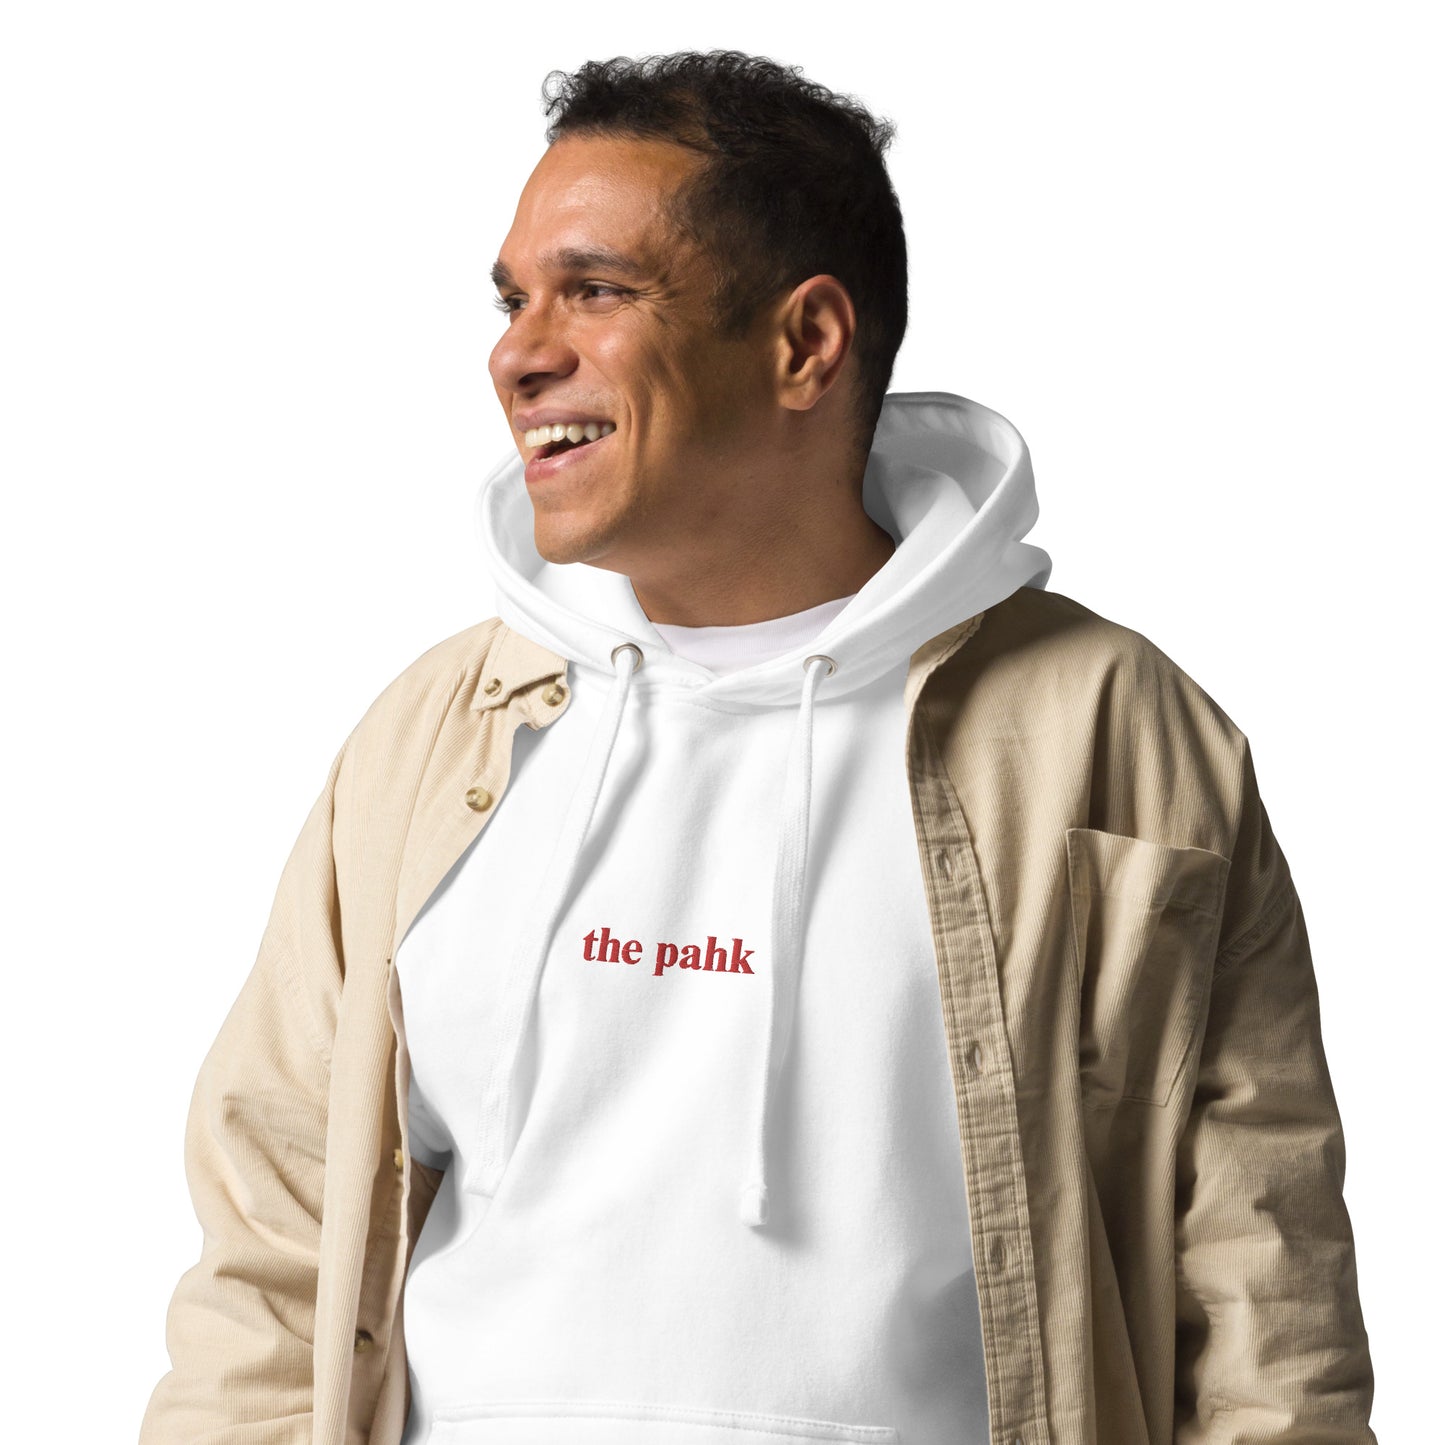 man wearing white hoodie that says "the pahk" in red embroidery